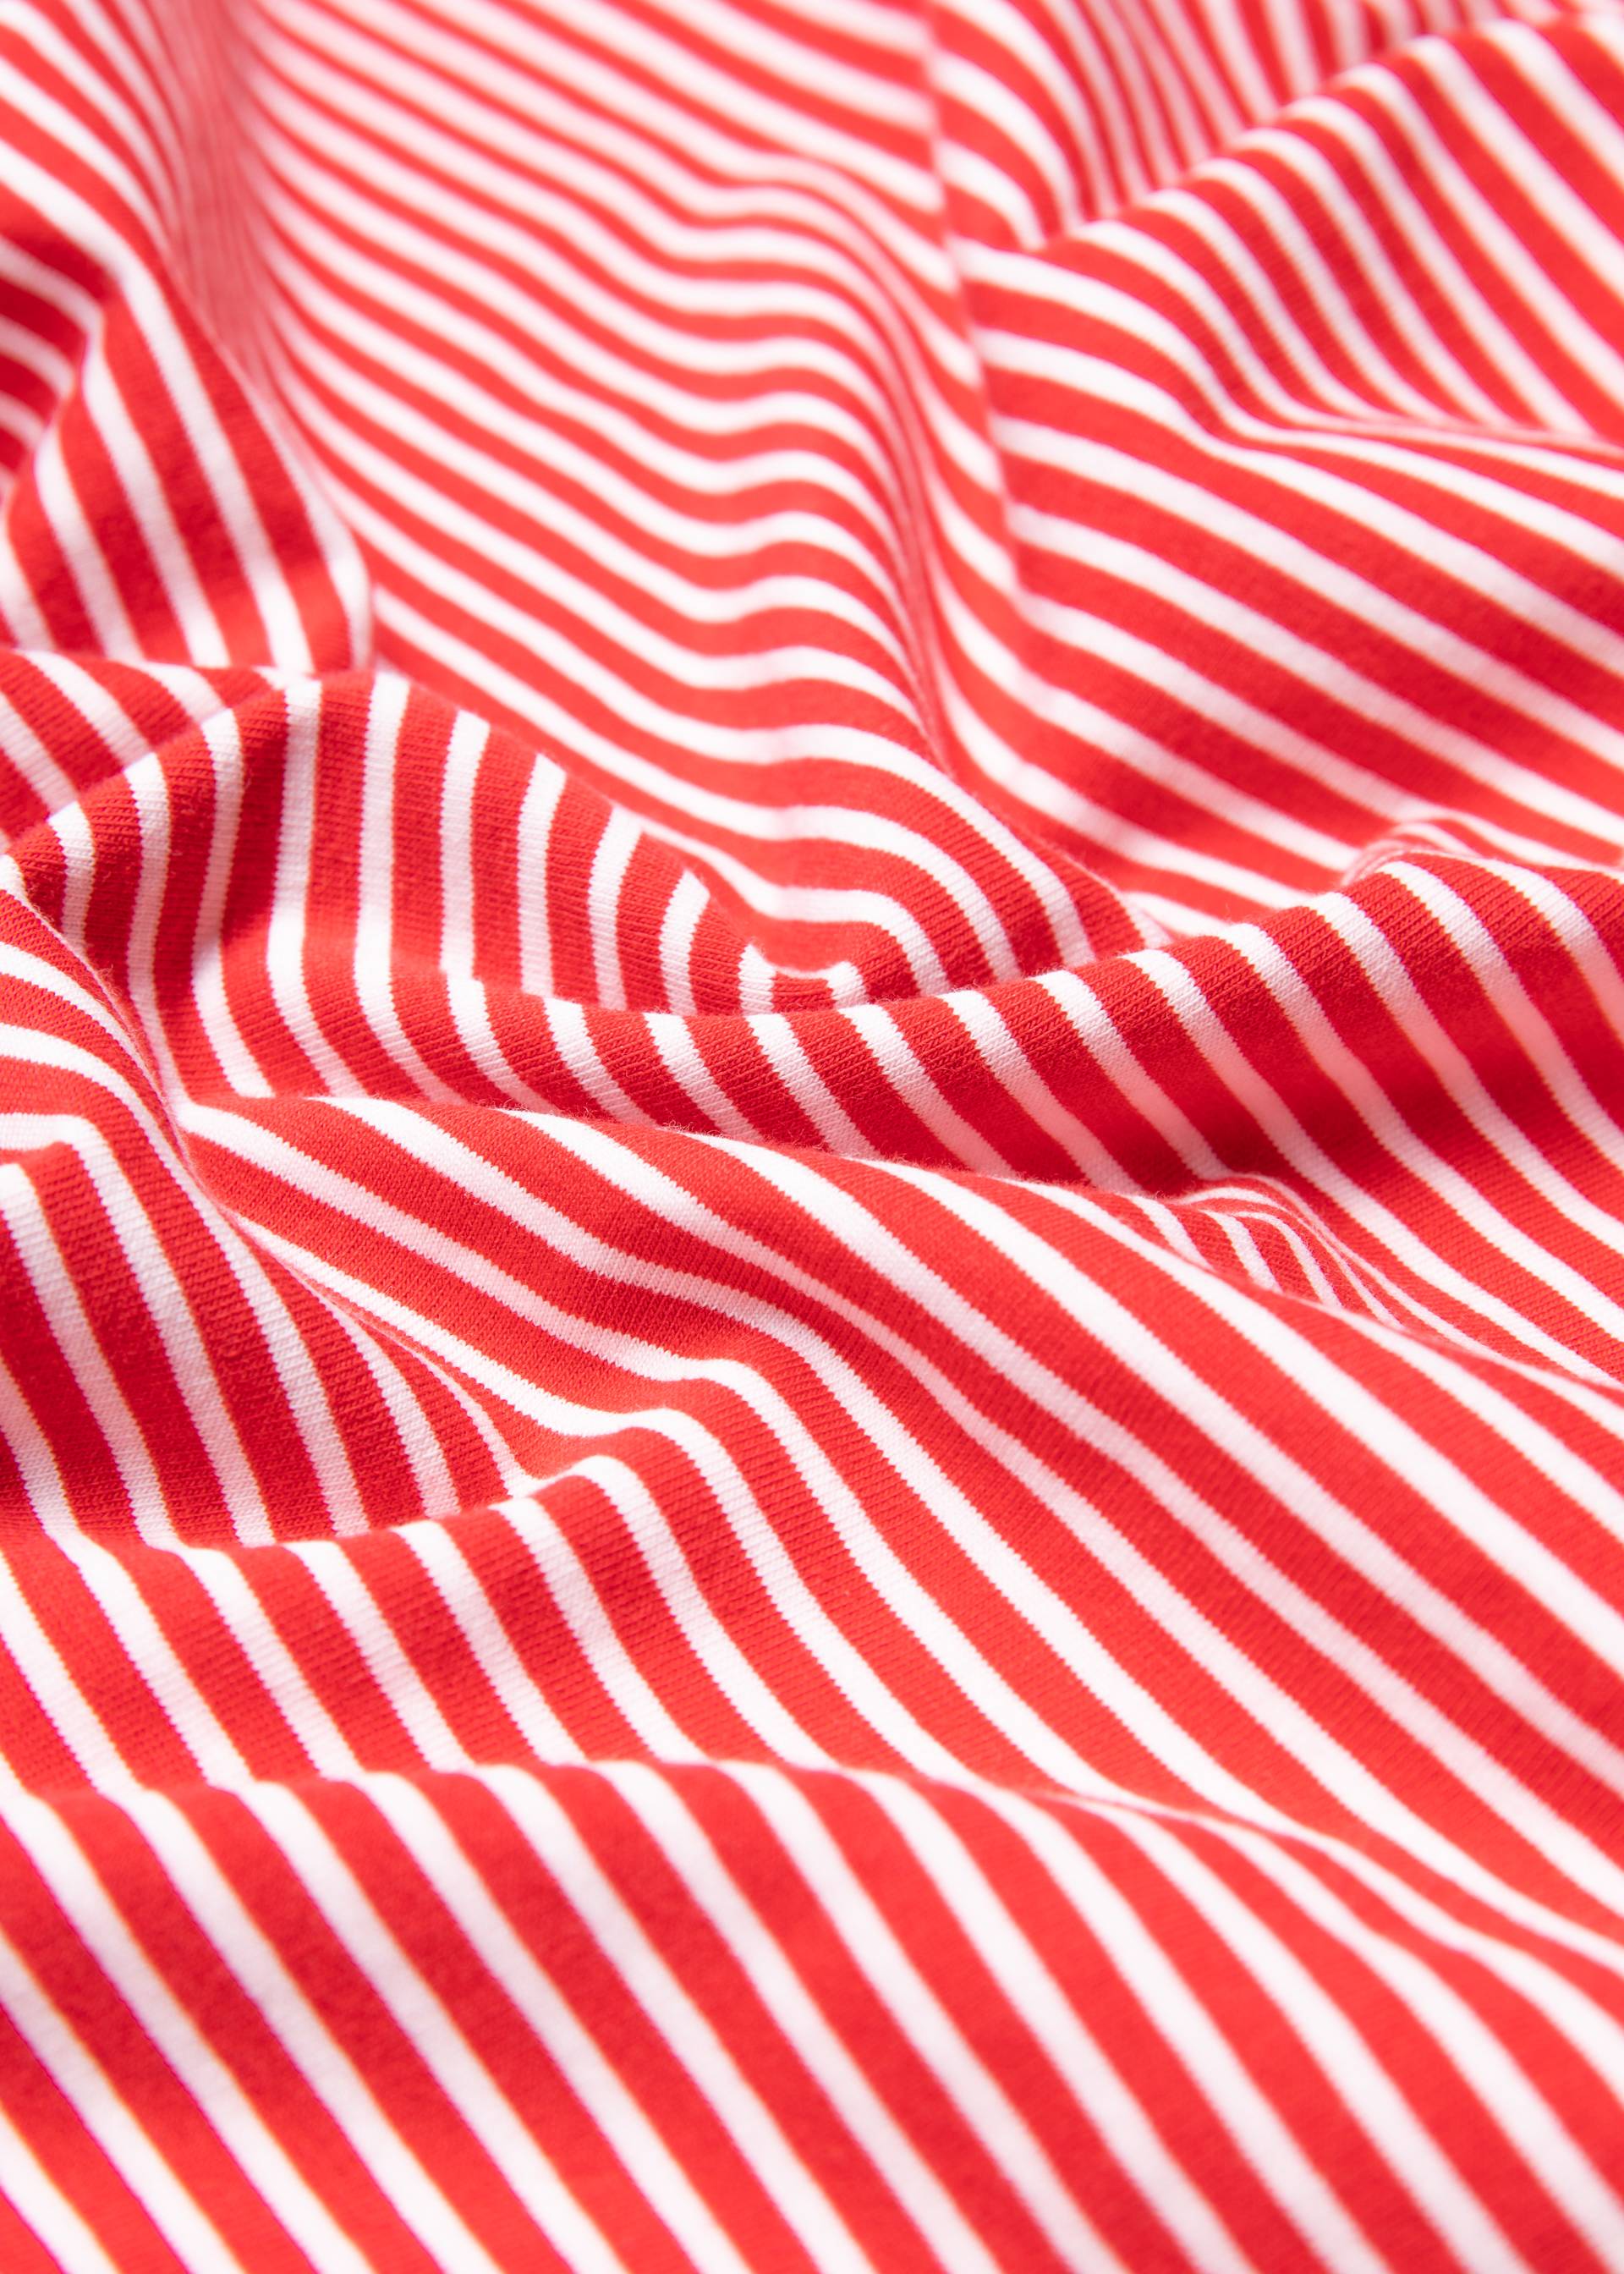 T-Shirt Sailordarling, hot stripe, Tops, Red